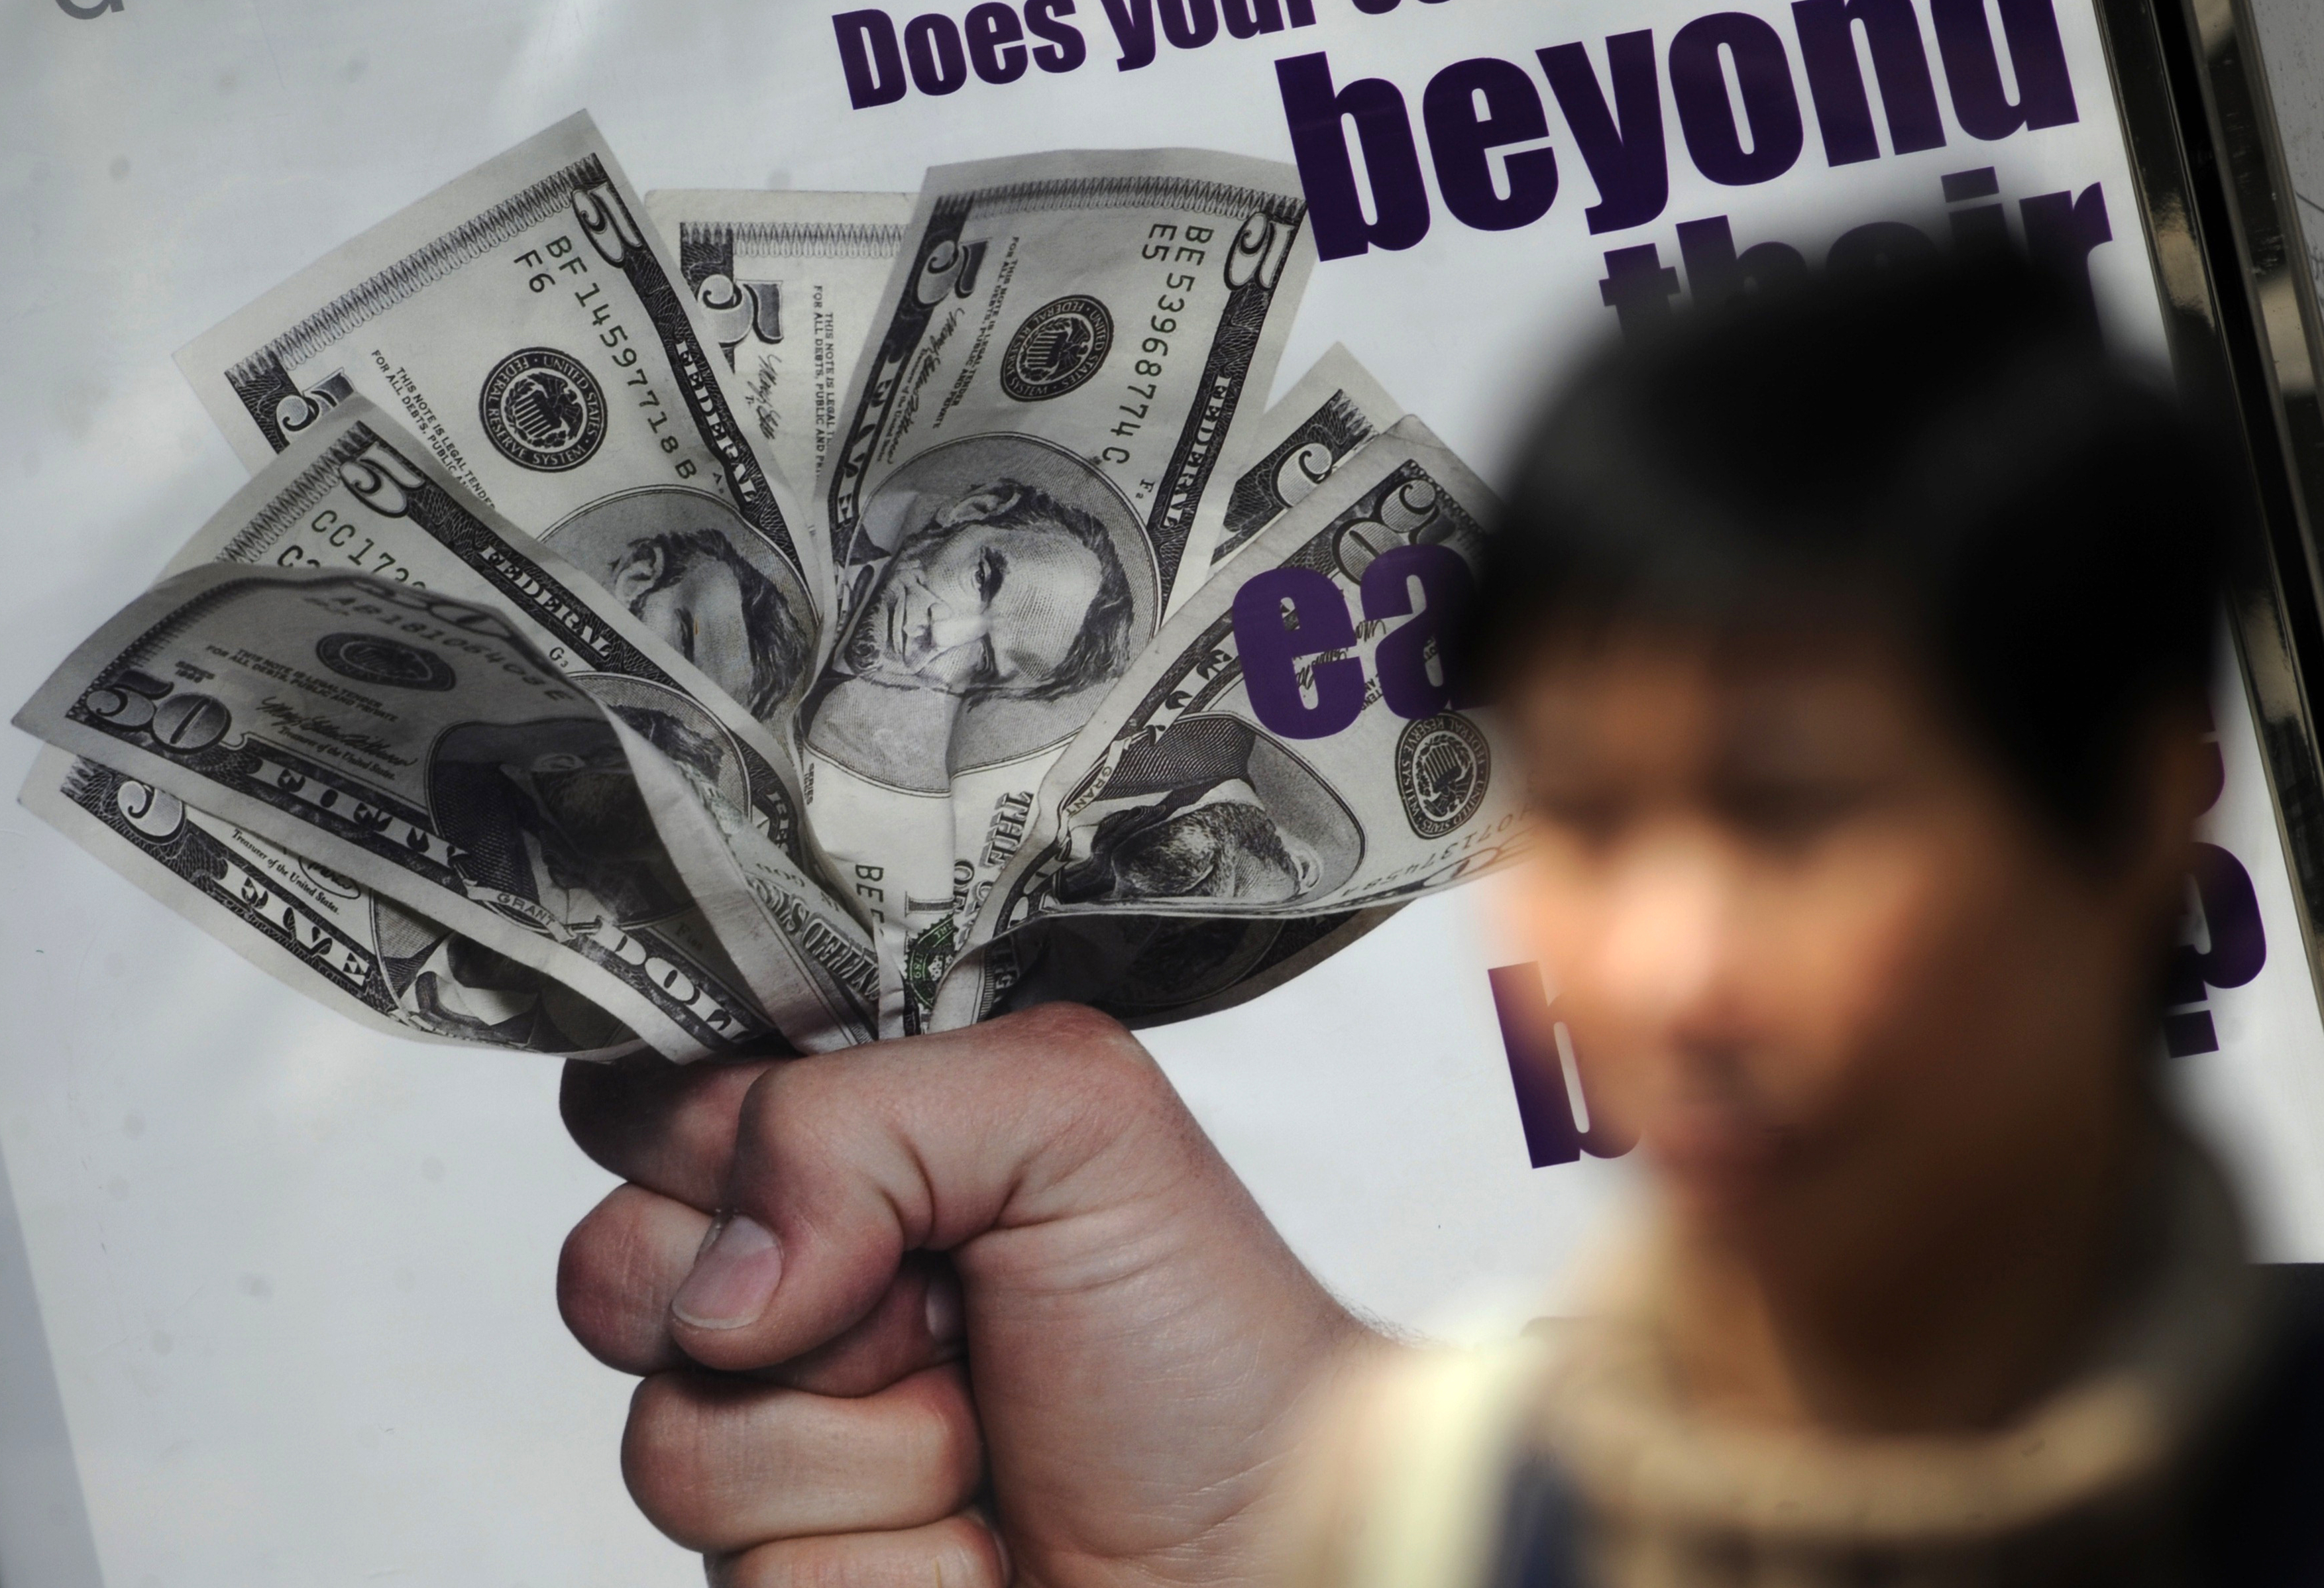 A pedestrian walks past an advertisment featuring US dollar bills in Hong Kong on April 6, 2011. The USD clawed back lost ground against the euro in Asian trade on April 5 following remarks by Fed chief Ben Bernanke that rising US inflation would not persist, analysts said. The greenback rose against most other Asian currencies, strengthening to 43.41 Philippine pesos from 43.32 on April 4, to 1,089.66 South Korean won from 1,087.66 and to 8,658.00 Indonesian rupiah from 8,655.00. AFP PHOTO / Antony DICKSON